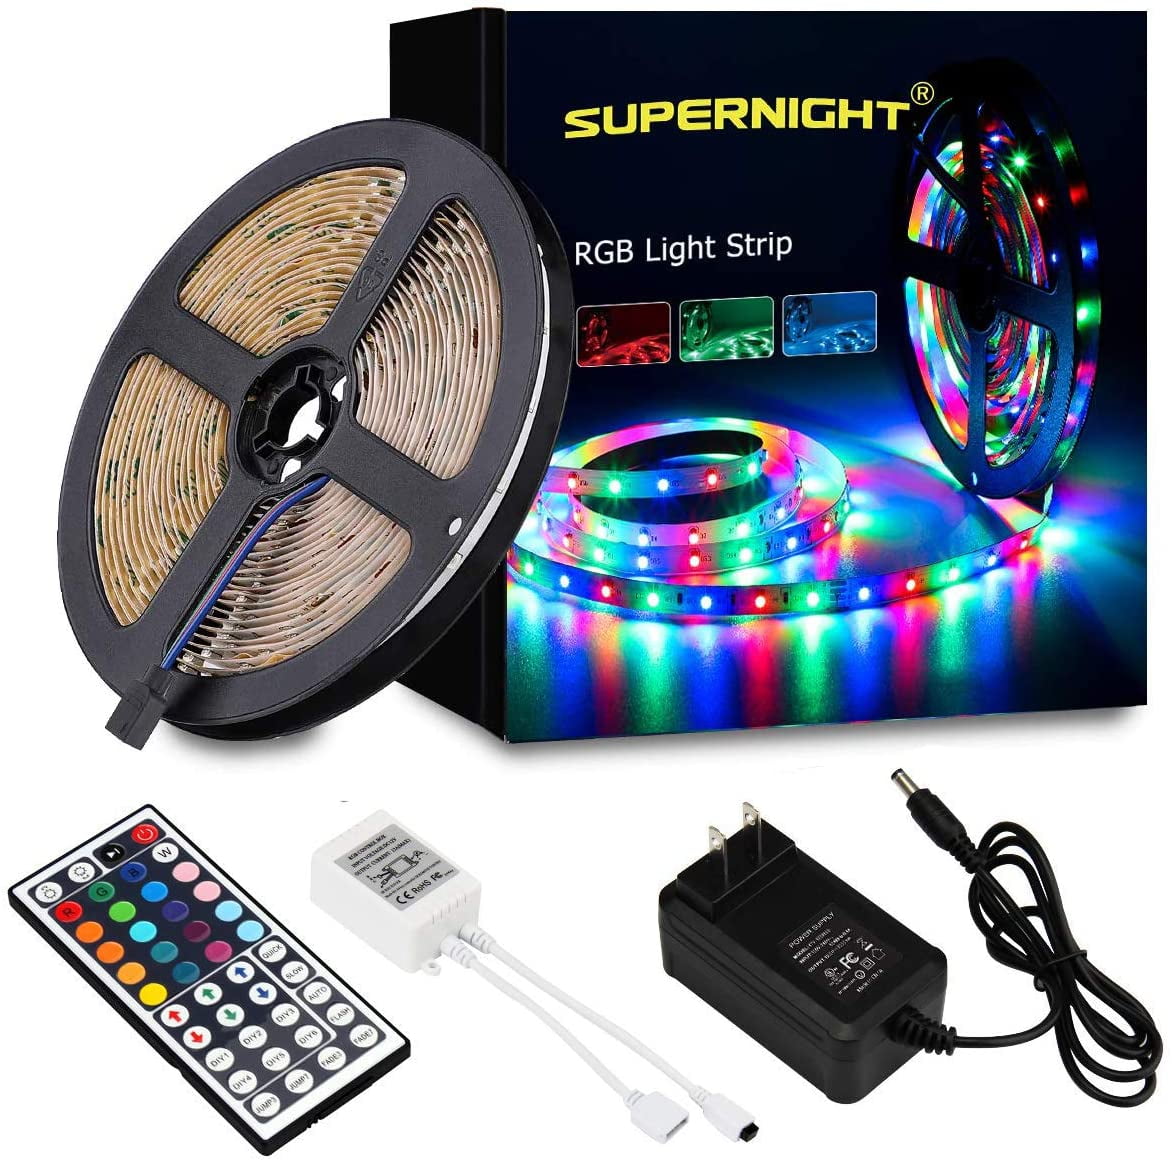  Tasmor Led Strip Lights Sync to Music, 65.6ft 5050 RGB Light  Color Changing with Music IP65 Waterproof LED Rope Light with Controller  for Home, Room, Bar, Party : Musical Instruments